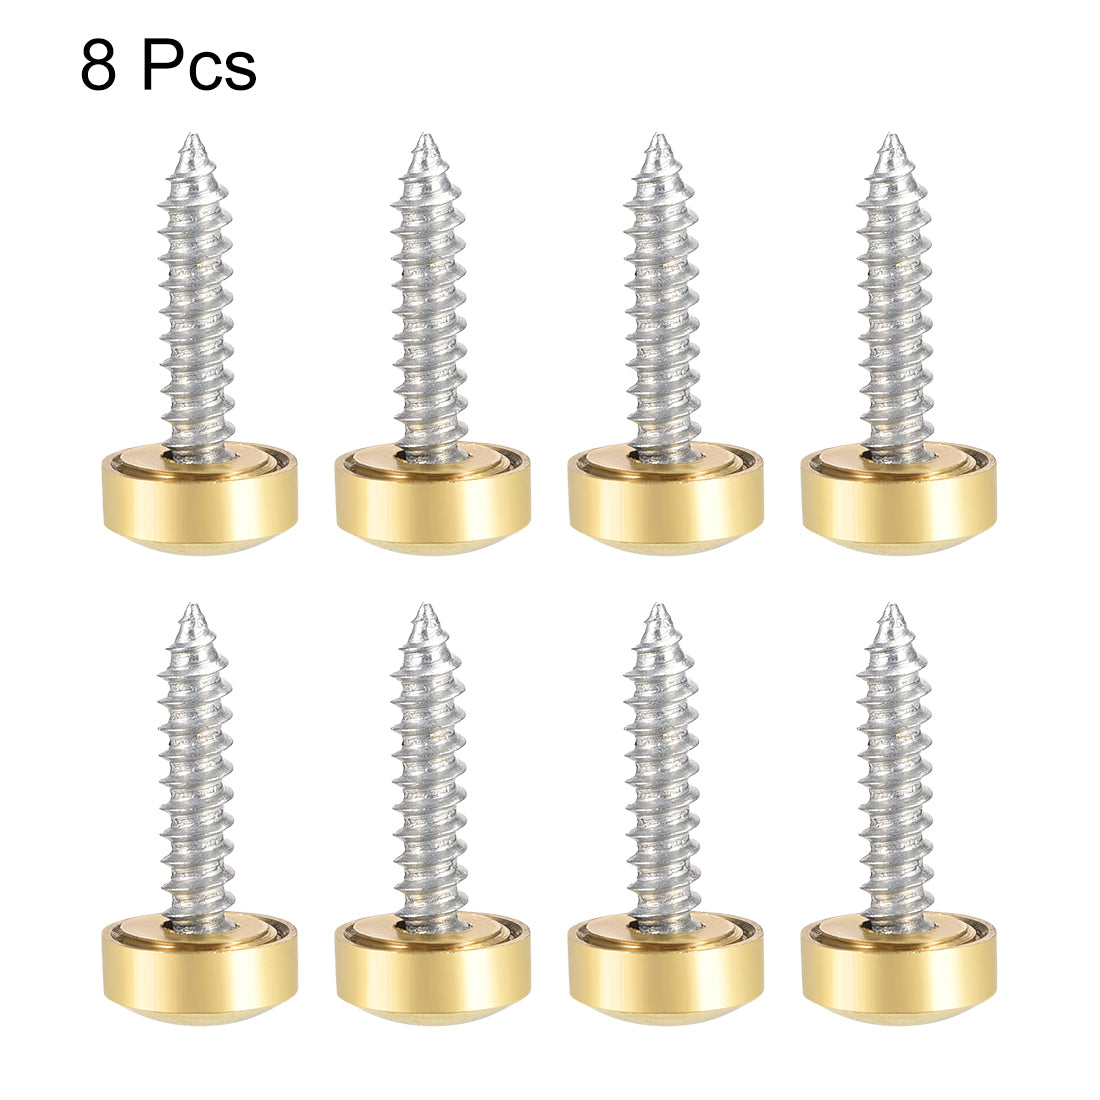 uxcell Uxcell Mirror Screw Decorative Cap Cover Nail Stainless Steel 8 pcs